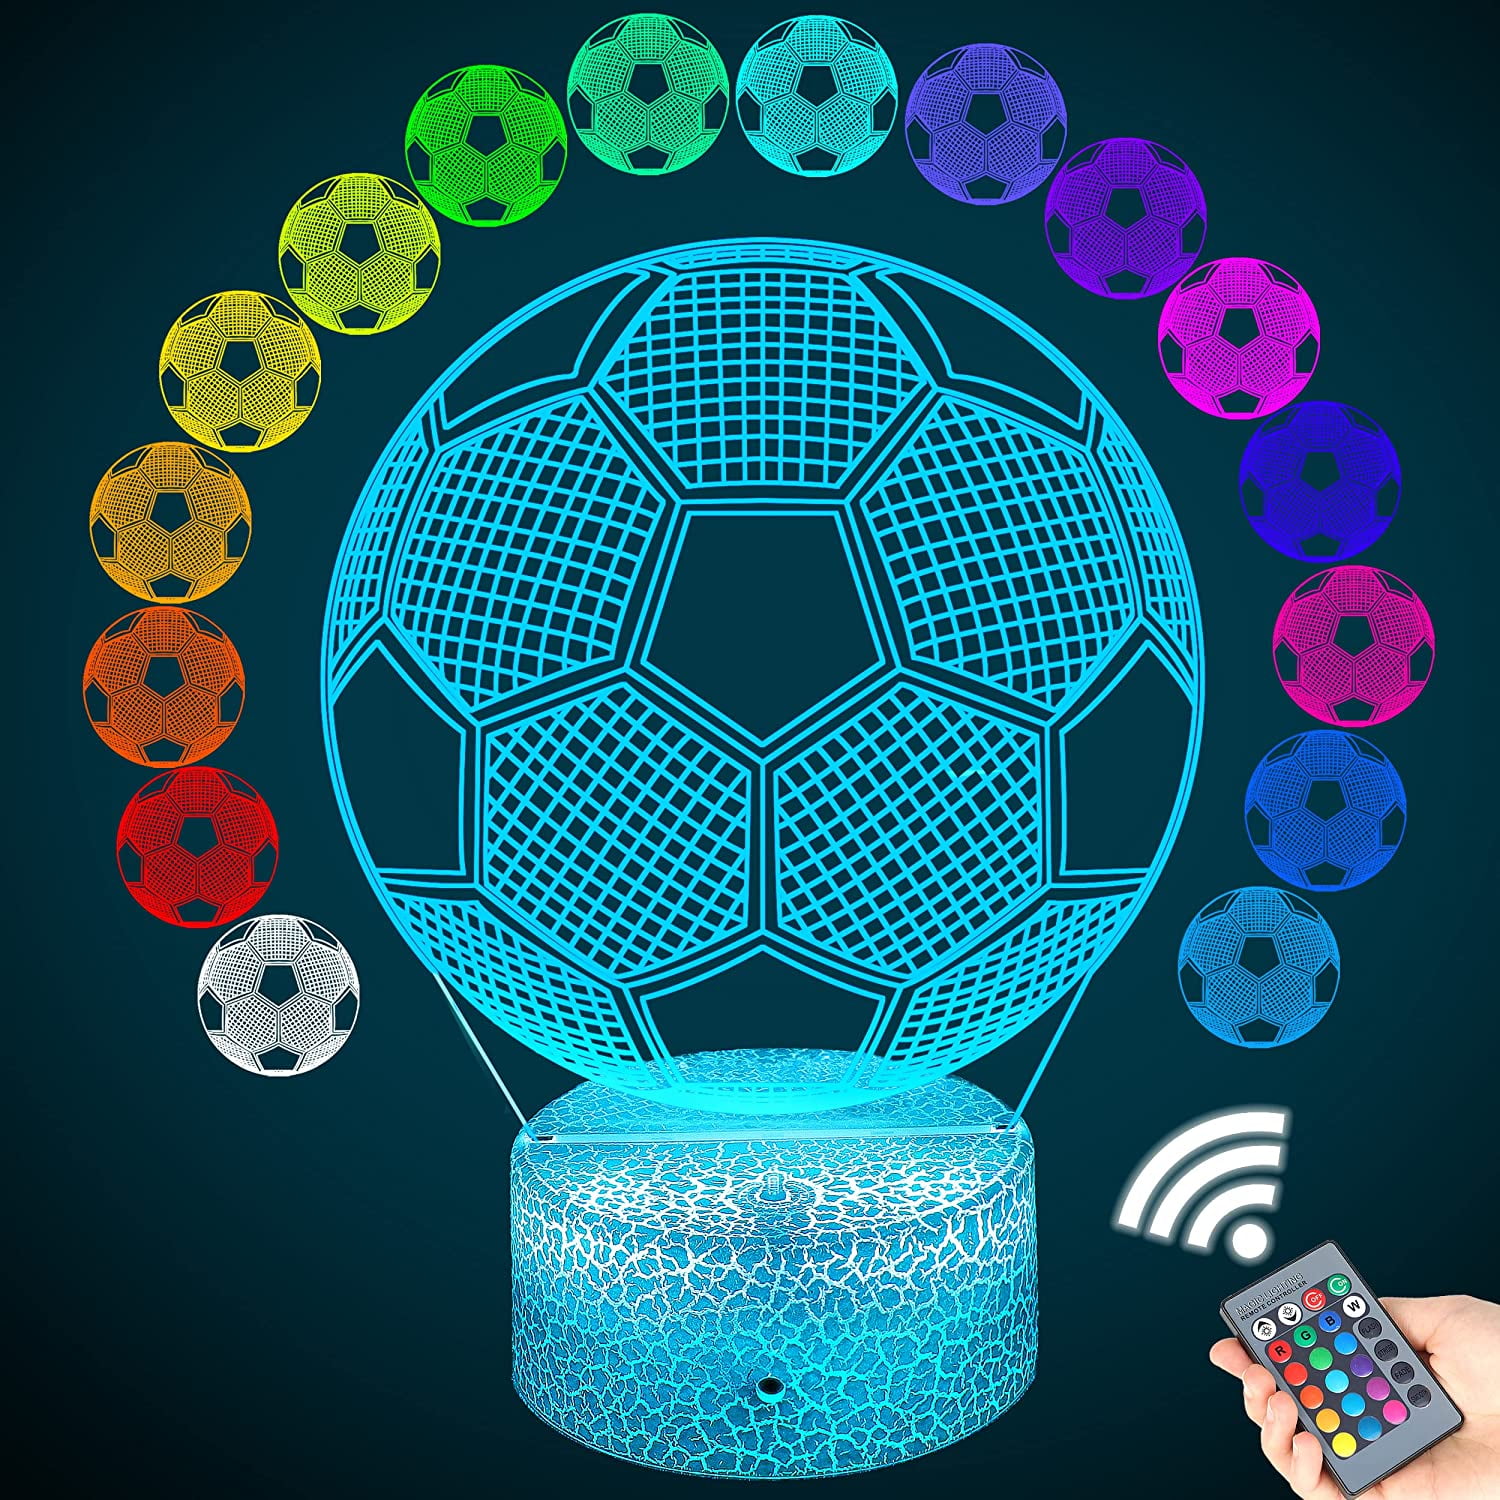 Football Club 3D Optical Illusion LED Lamps Night Light,Amazing 7 Colors Quick Touch Switch Lamps,USB Powered Deco Lamps,Birthday Christmas Holiday Gift for Kids and Friends Manchester City FC 